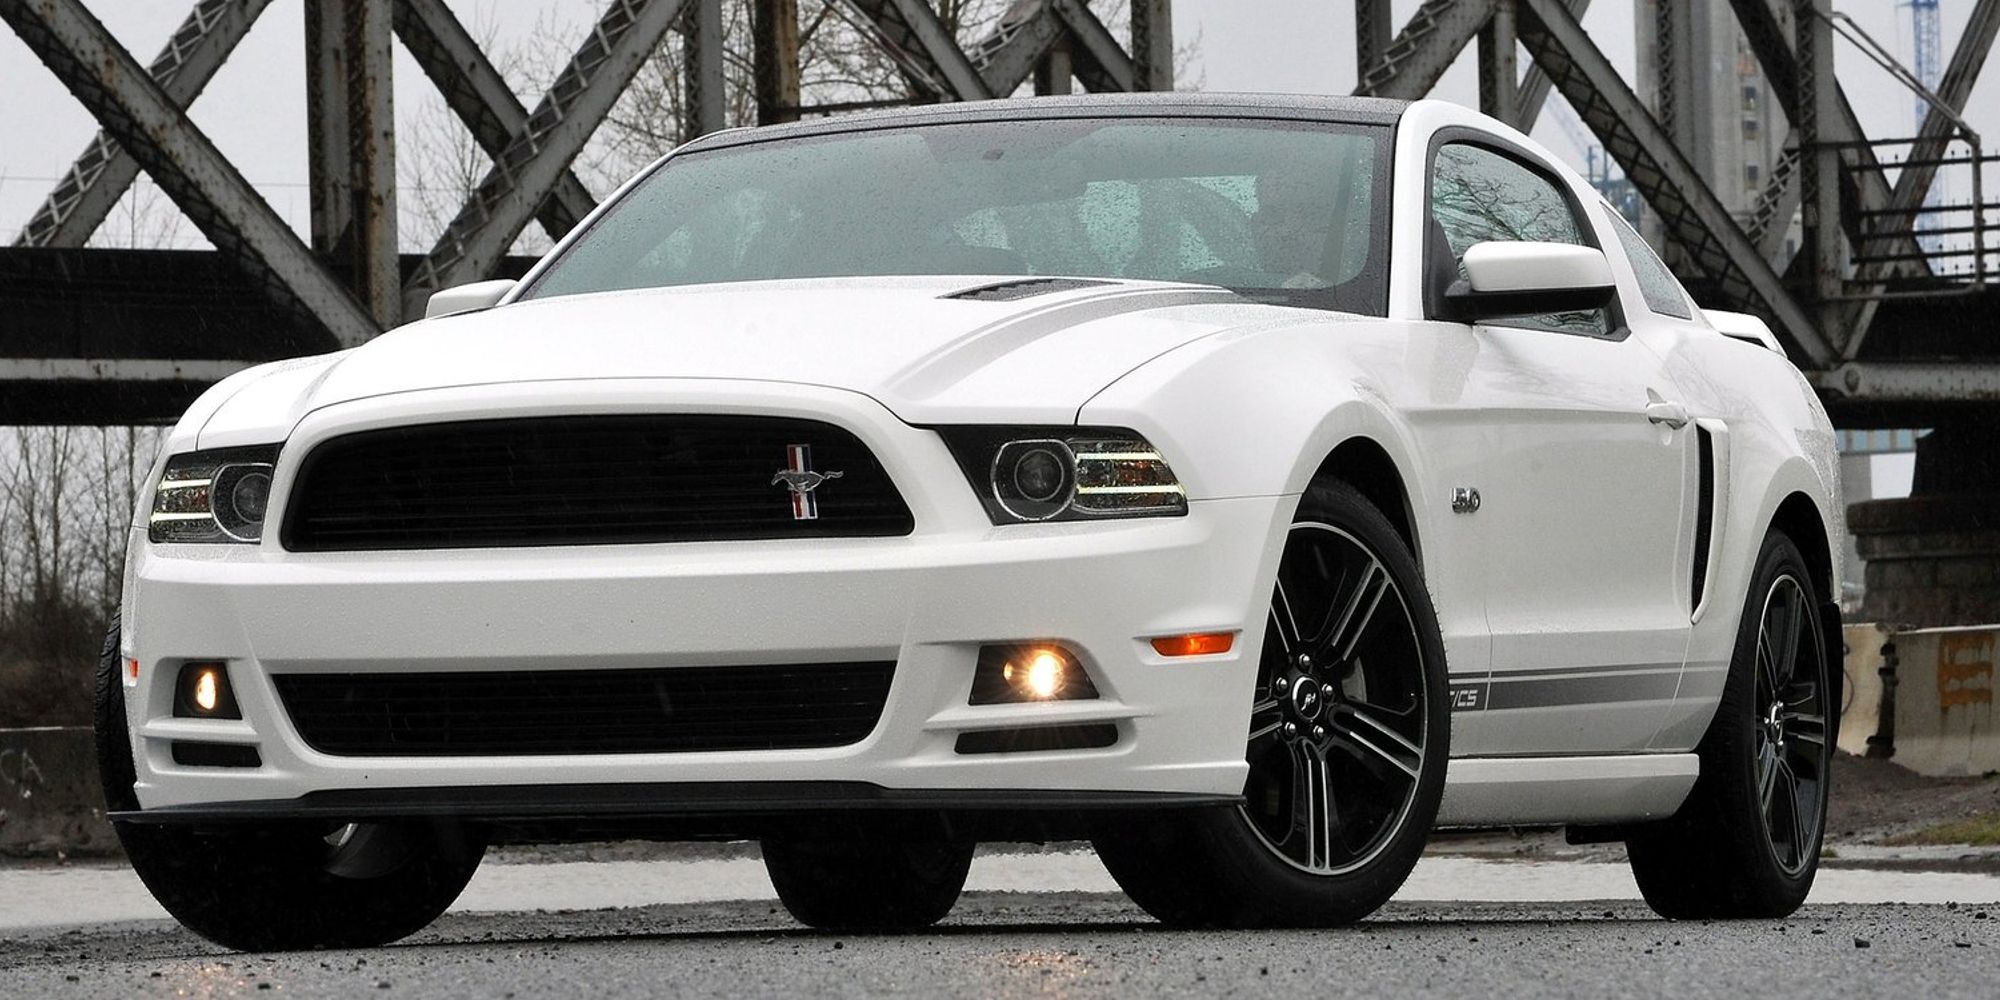 The front of a white S-197-II Mustang